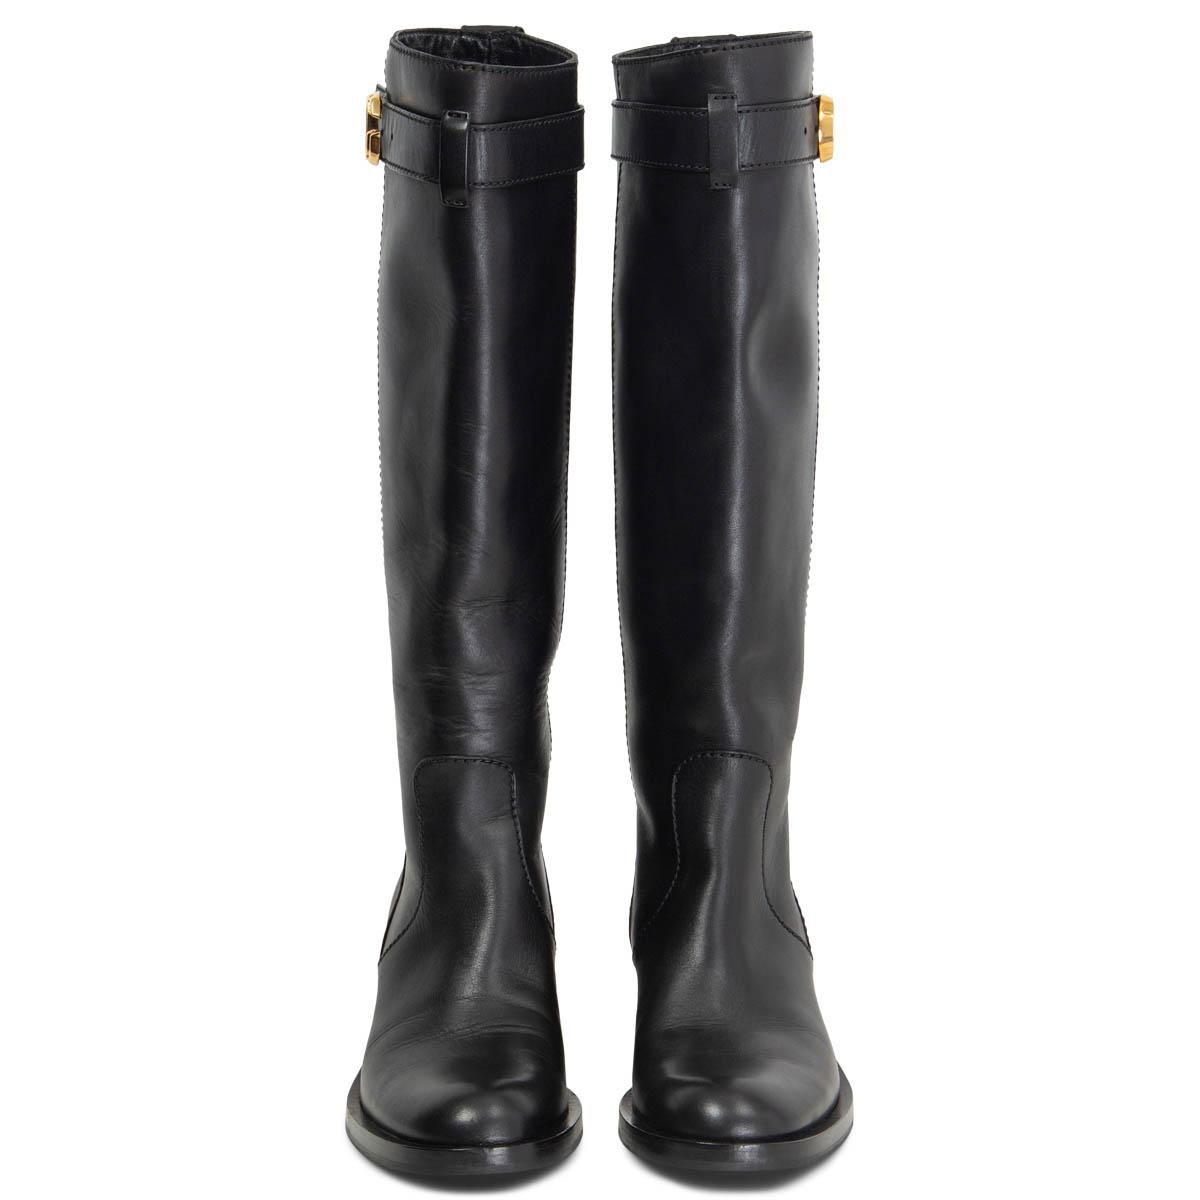 100% authentic Gucci knee-high flat riding boots in black smooth calfskin featuring GG buckle in antique gold-tone metal. Have been worn and are in excellent condition.

Measurements
Imprinted Size	36.5
Shoe Size	36.5
Inside Sole	23.5cm